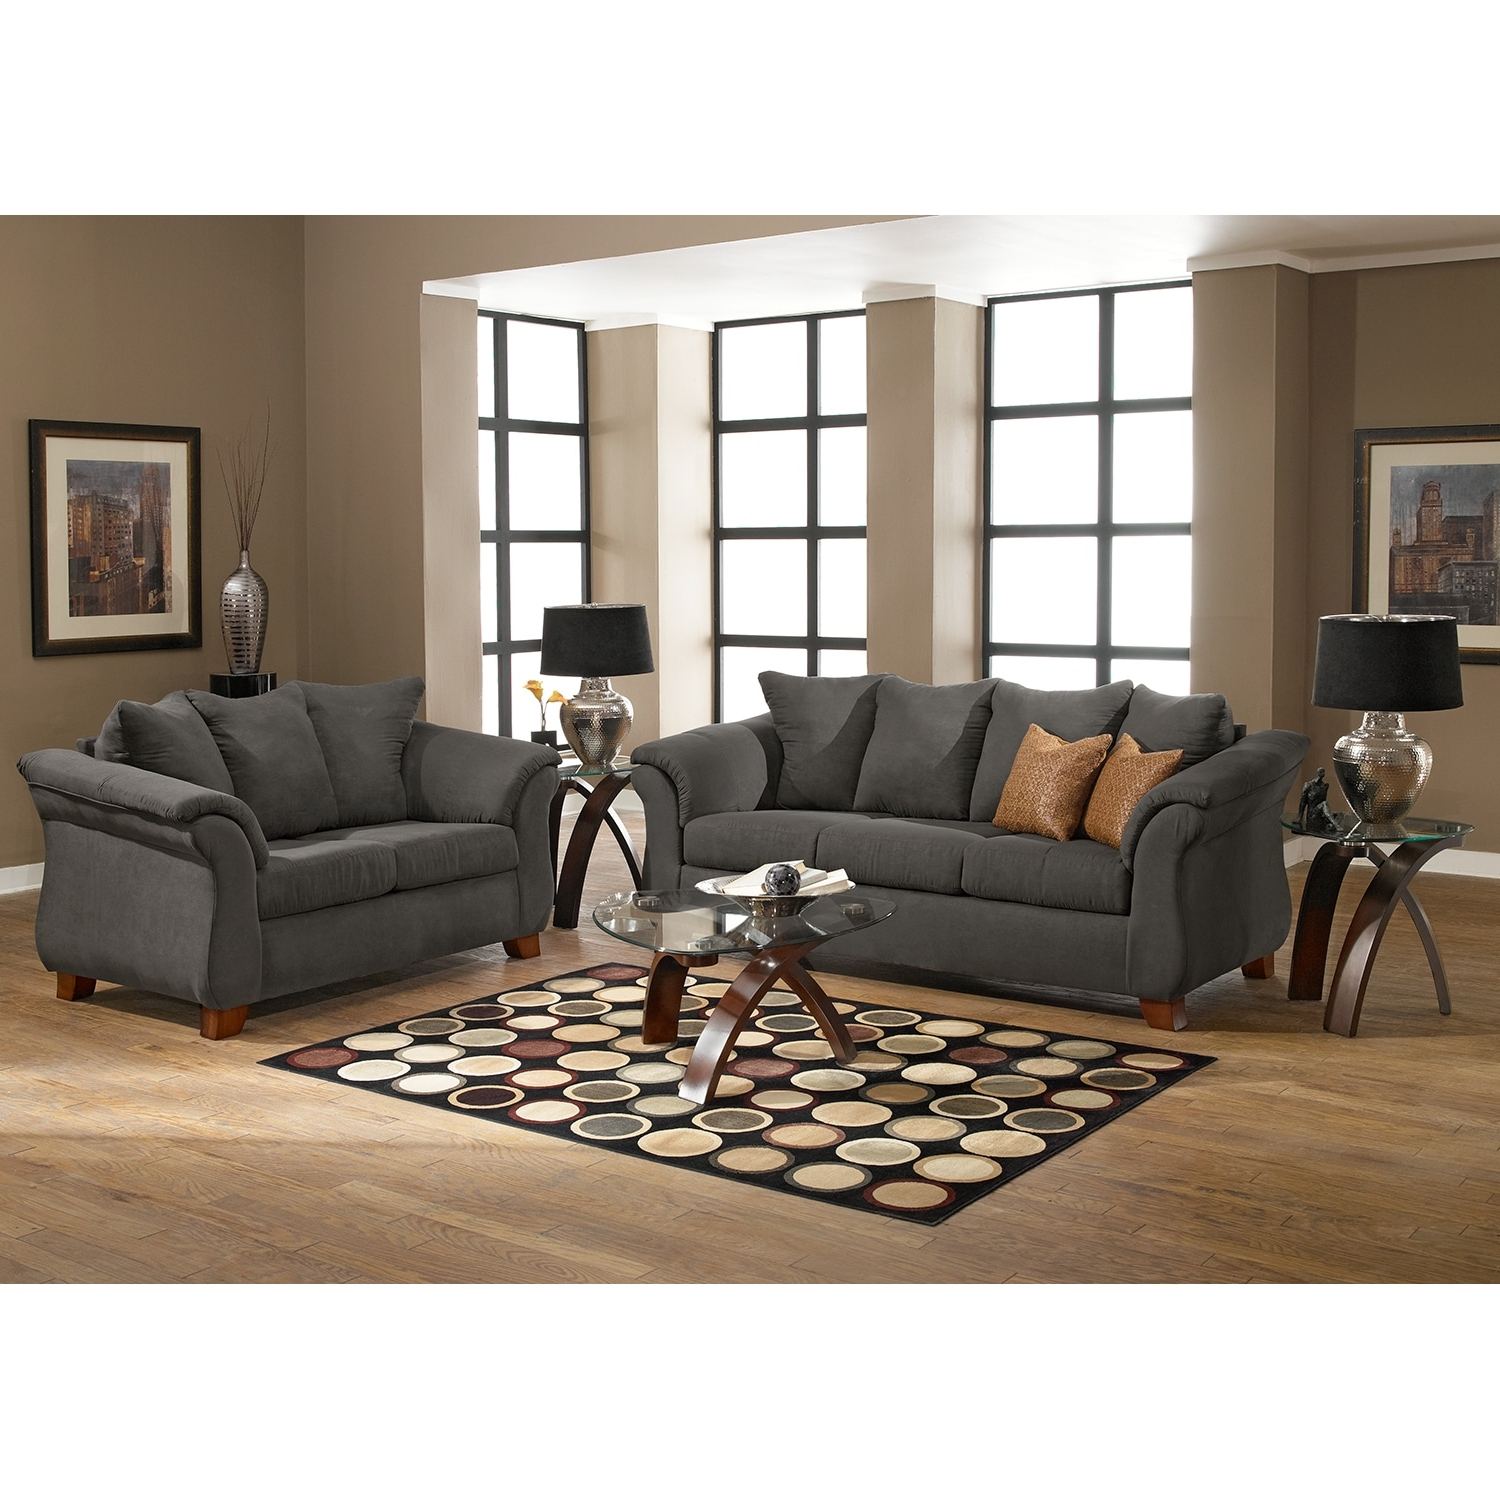 Sofa Loveseat And Chairs